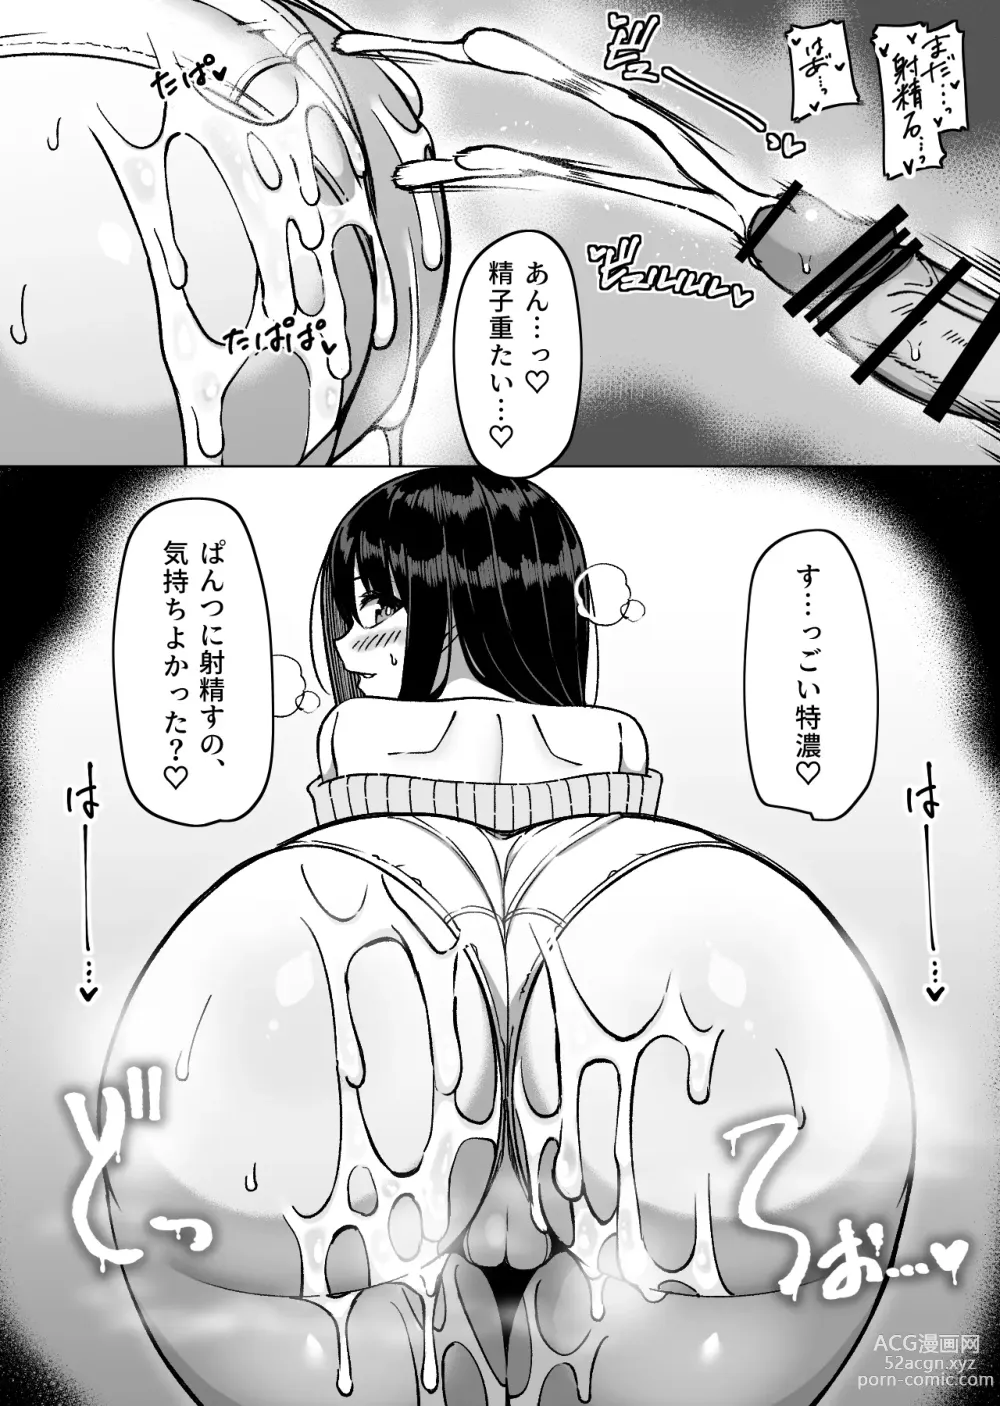 Page 9 of doujinshi Daily Sleepover With Big-breasted Girls